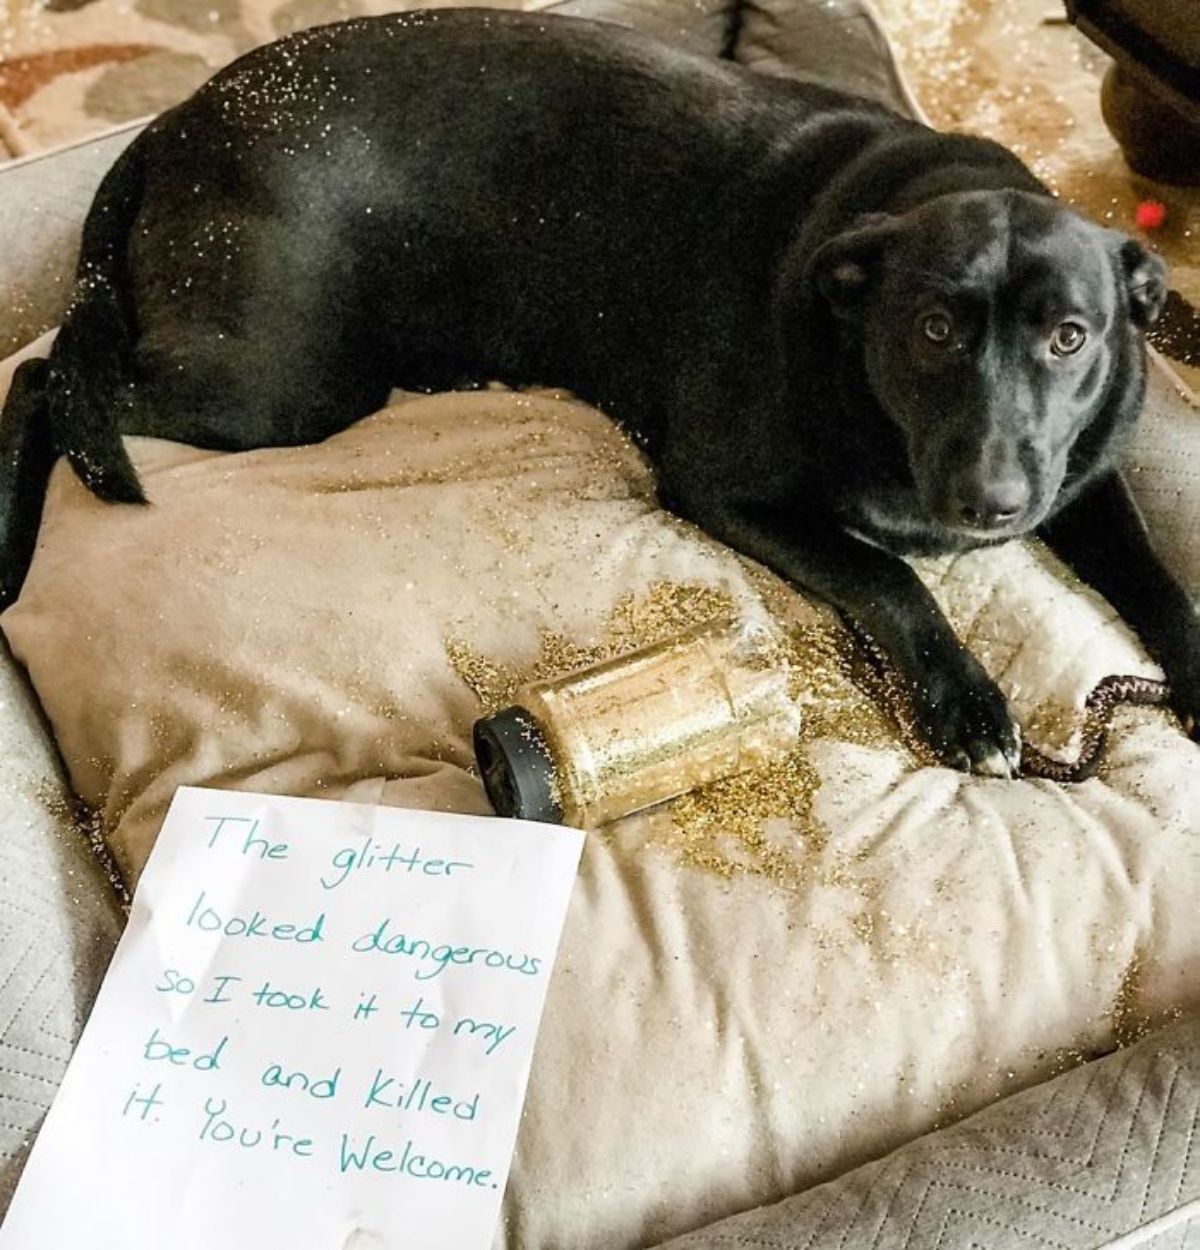 black labrador laying on a brown dog bed with a bottle of glitter spilt all over with a note saying the glitter bottle looked dangerous and the dog decided to kill it